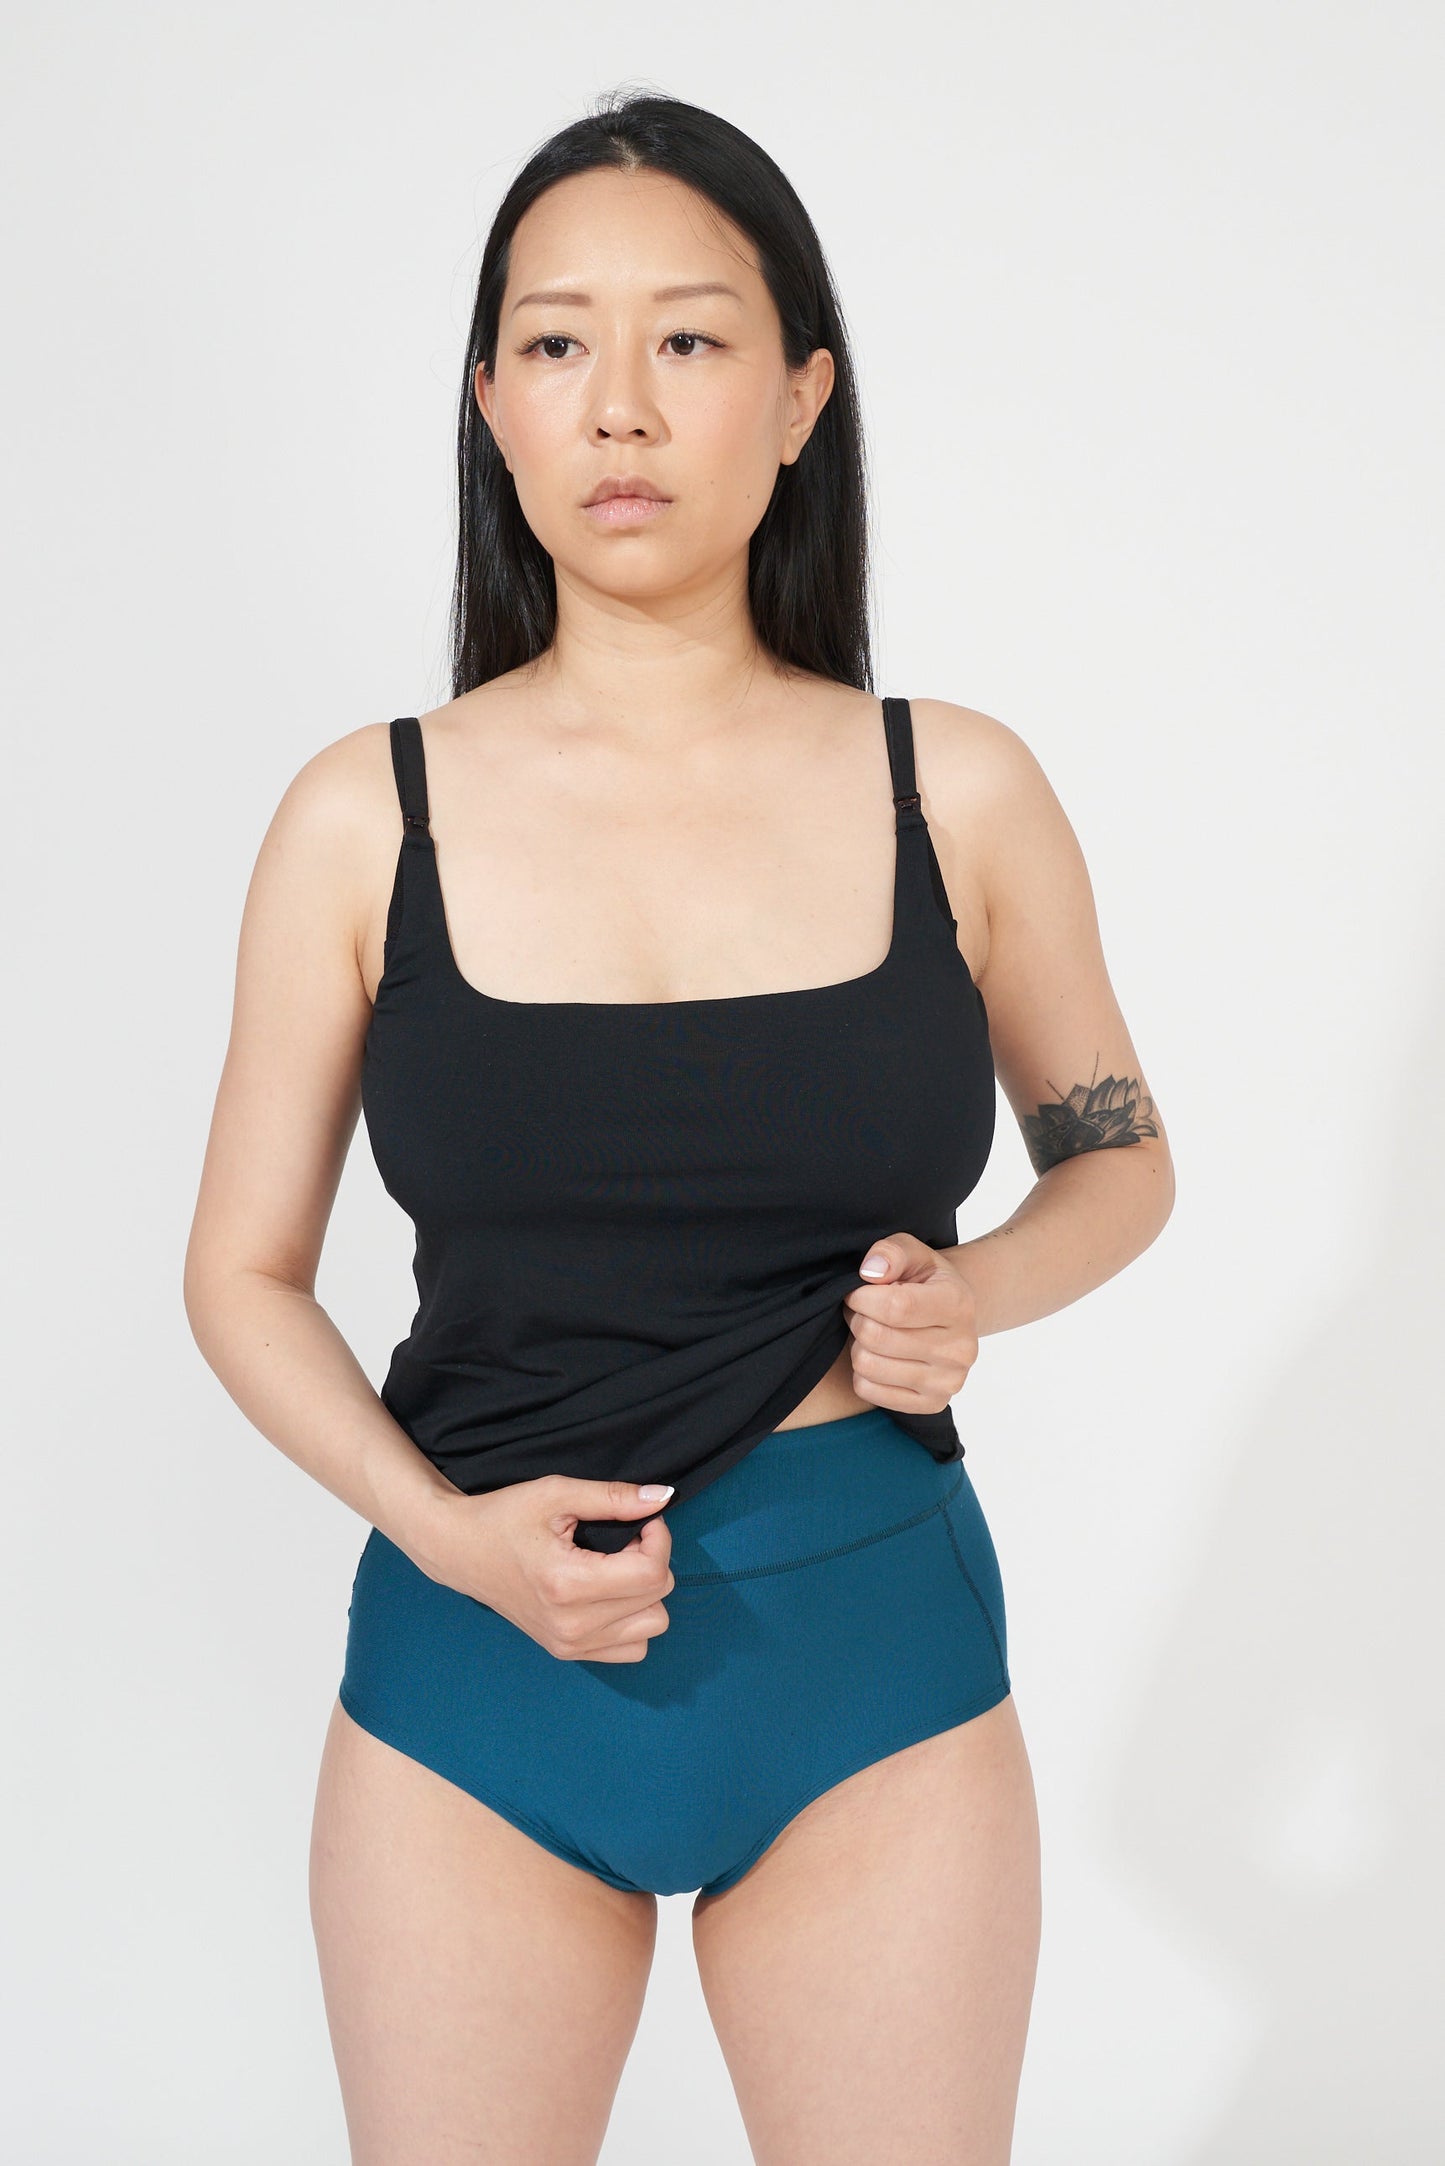 Ultra-stretchy in all the right places — from the waist to the inner thigh — to accommodate swelling and maternity & postpartum body fluctuations. Model is postpartum and wearing Pacific.